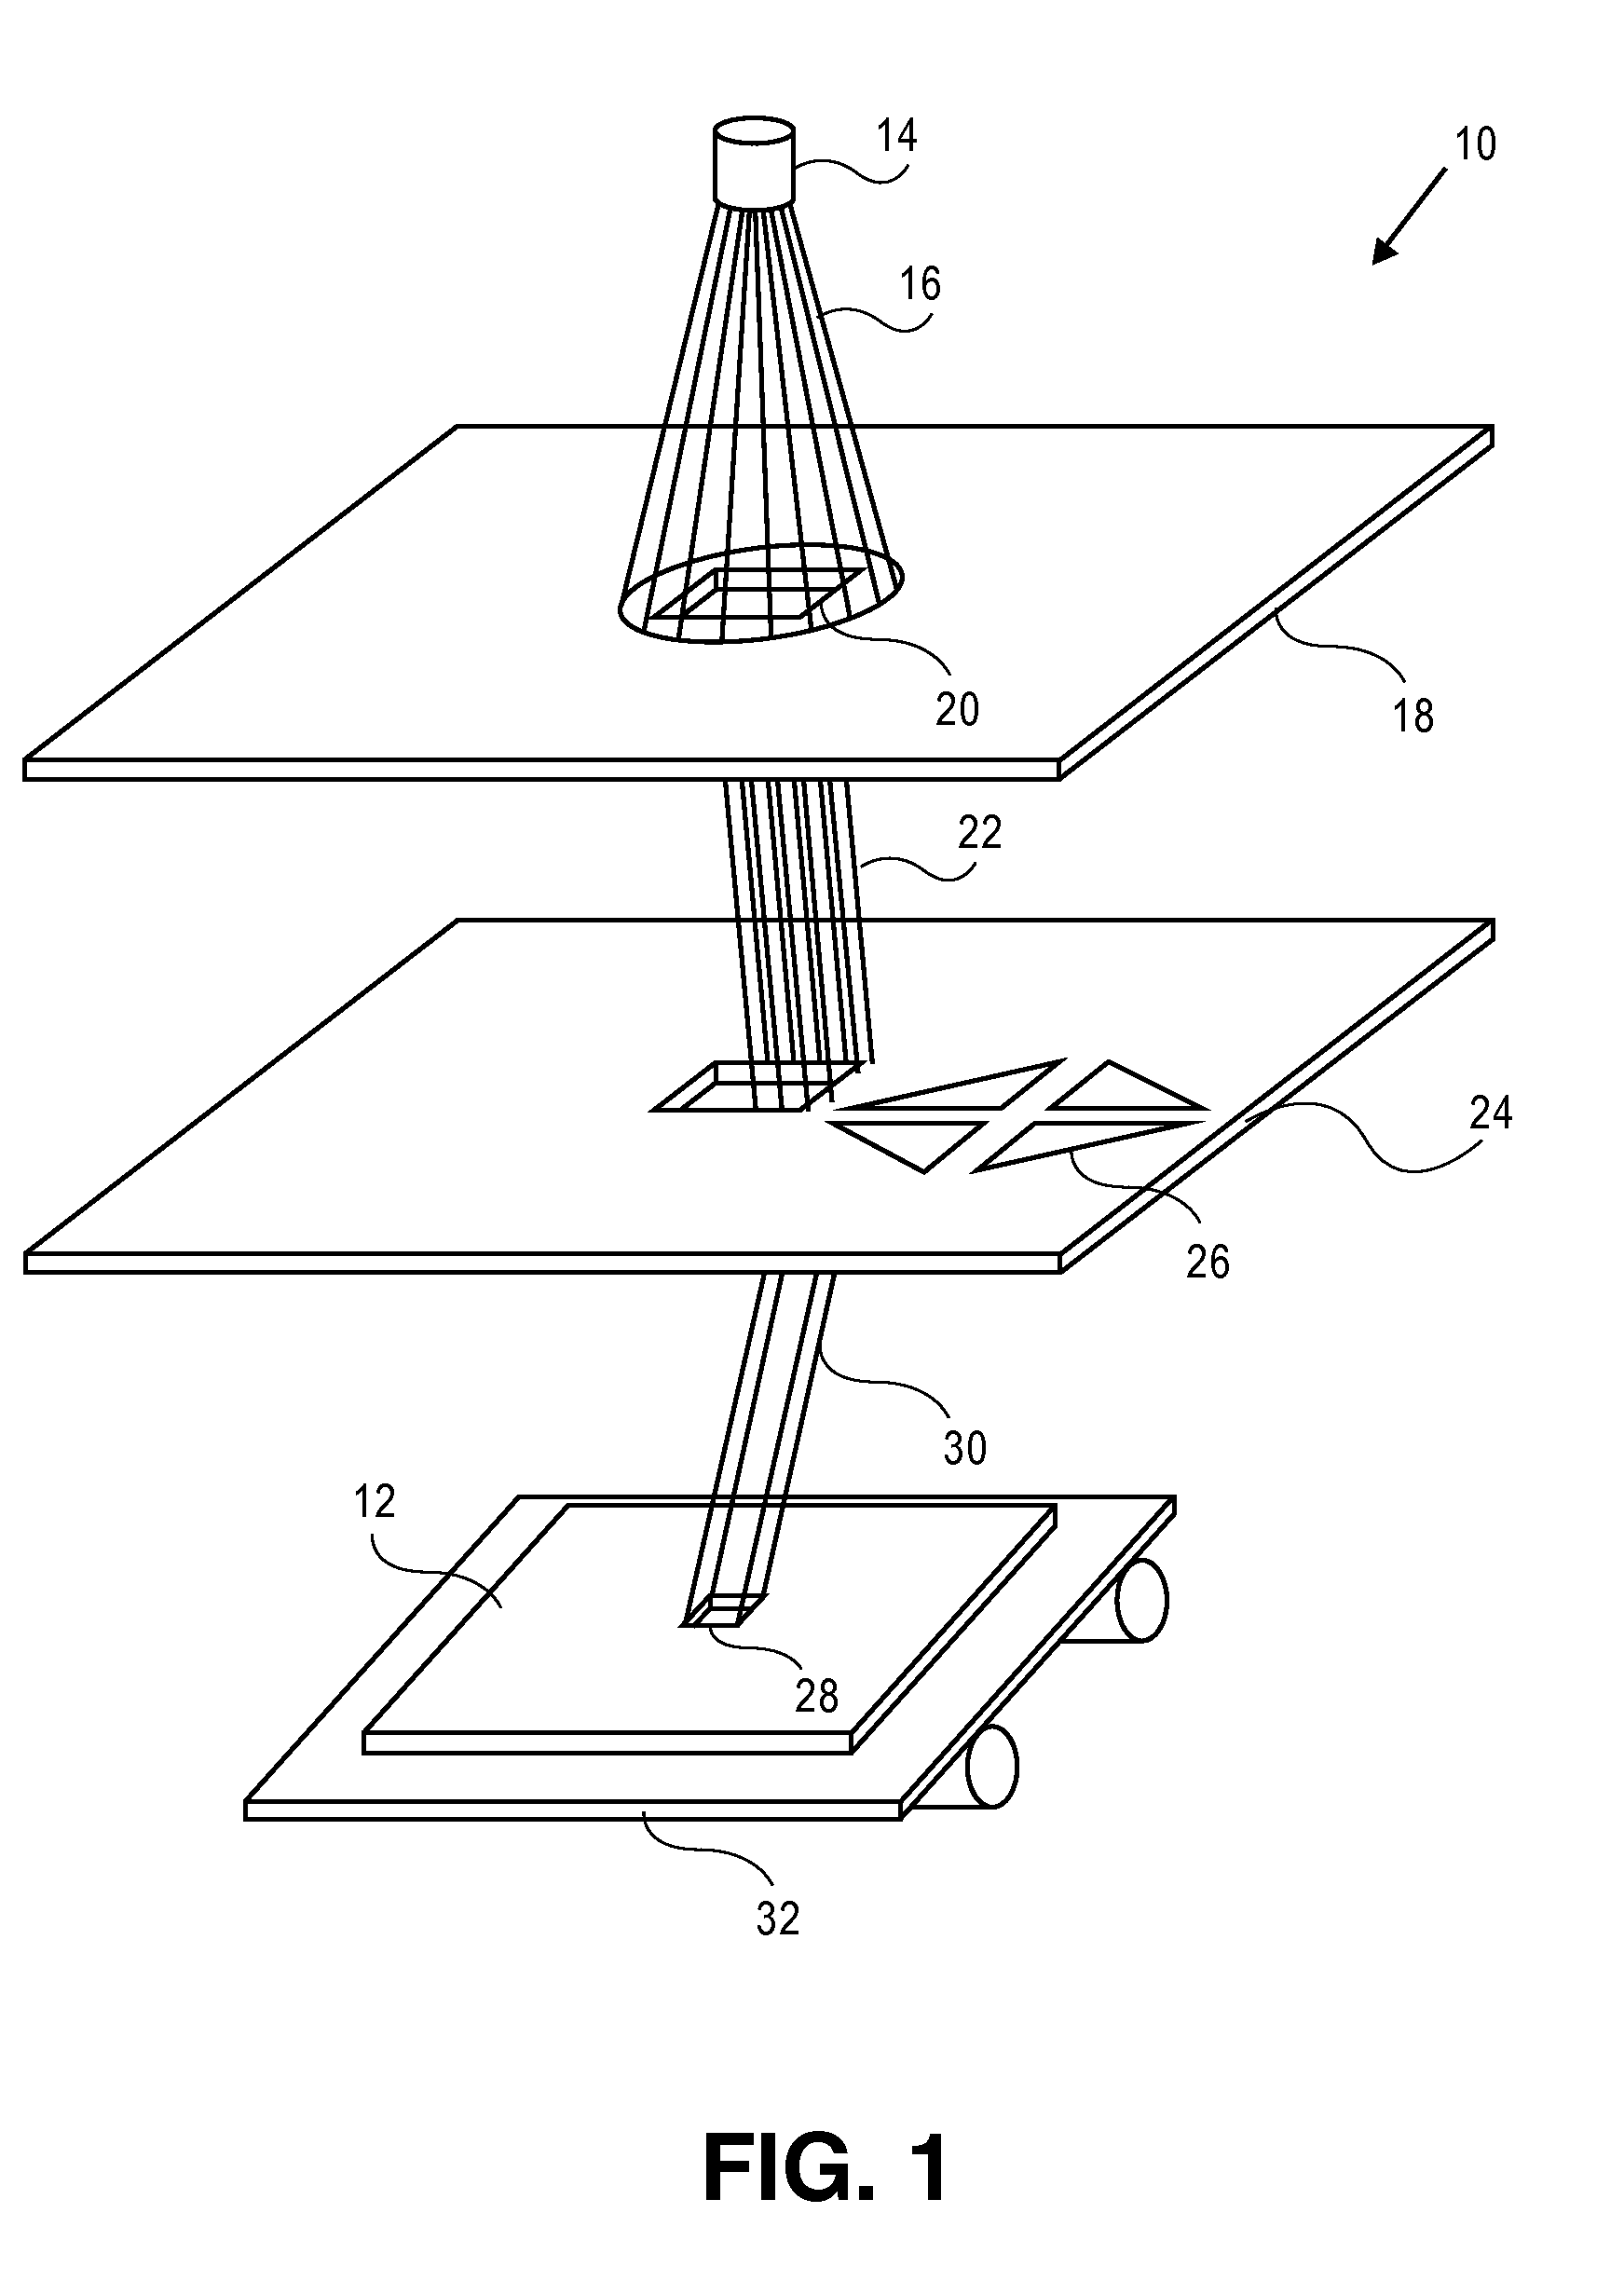 Method for Optical Proximity Correction of a Reticle to be Manufactured Using Variable Shaped Beam Lithography